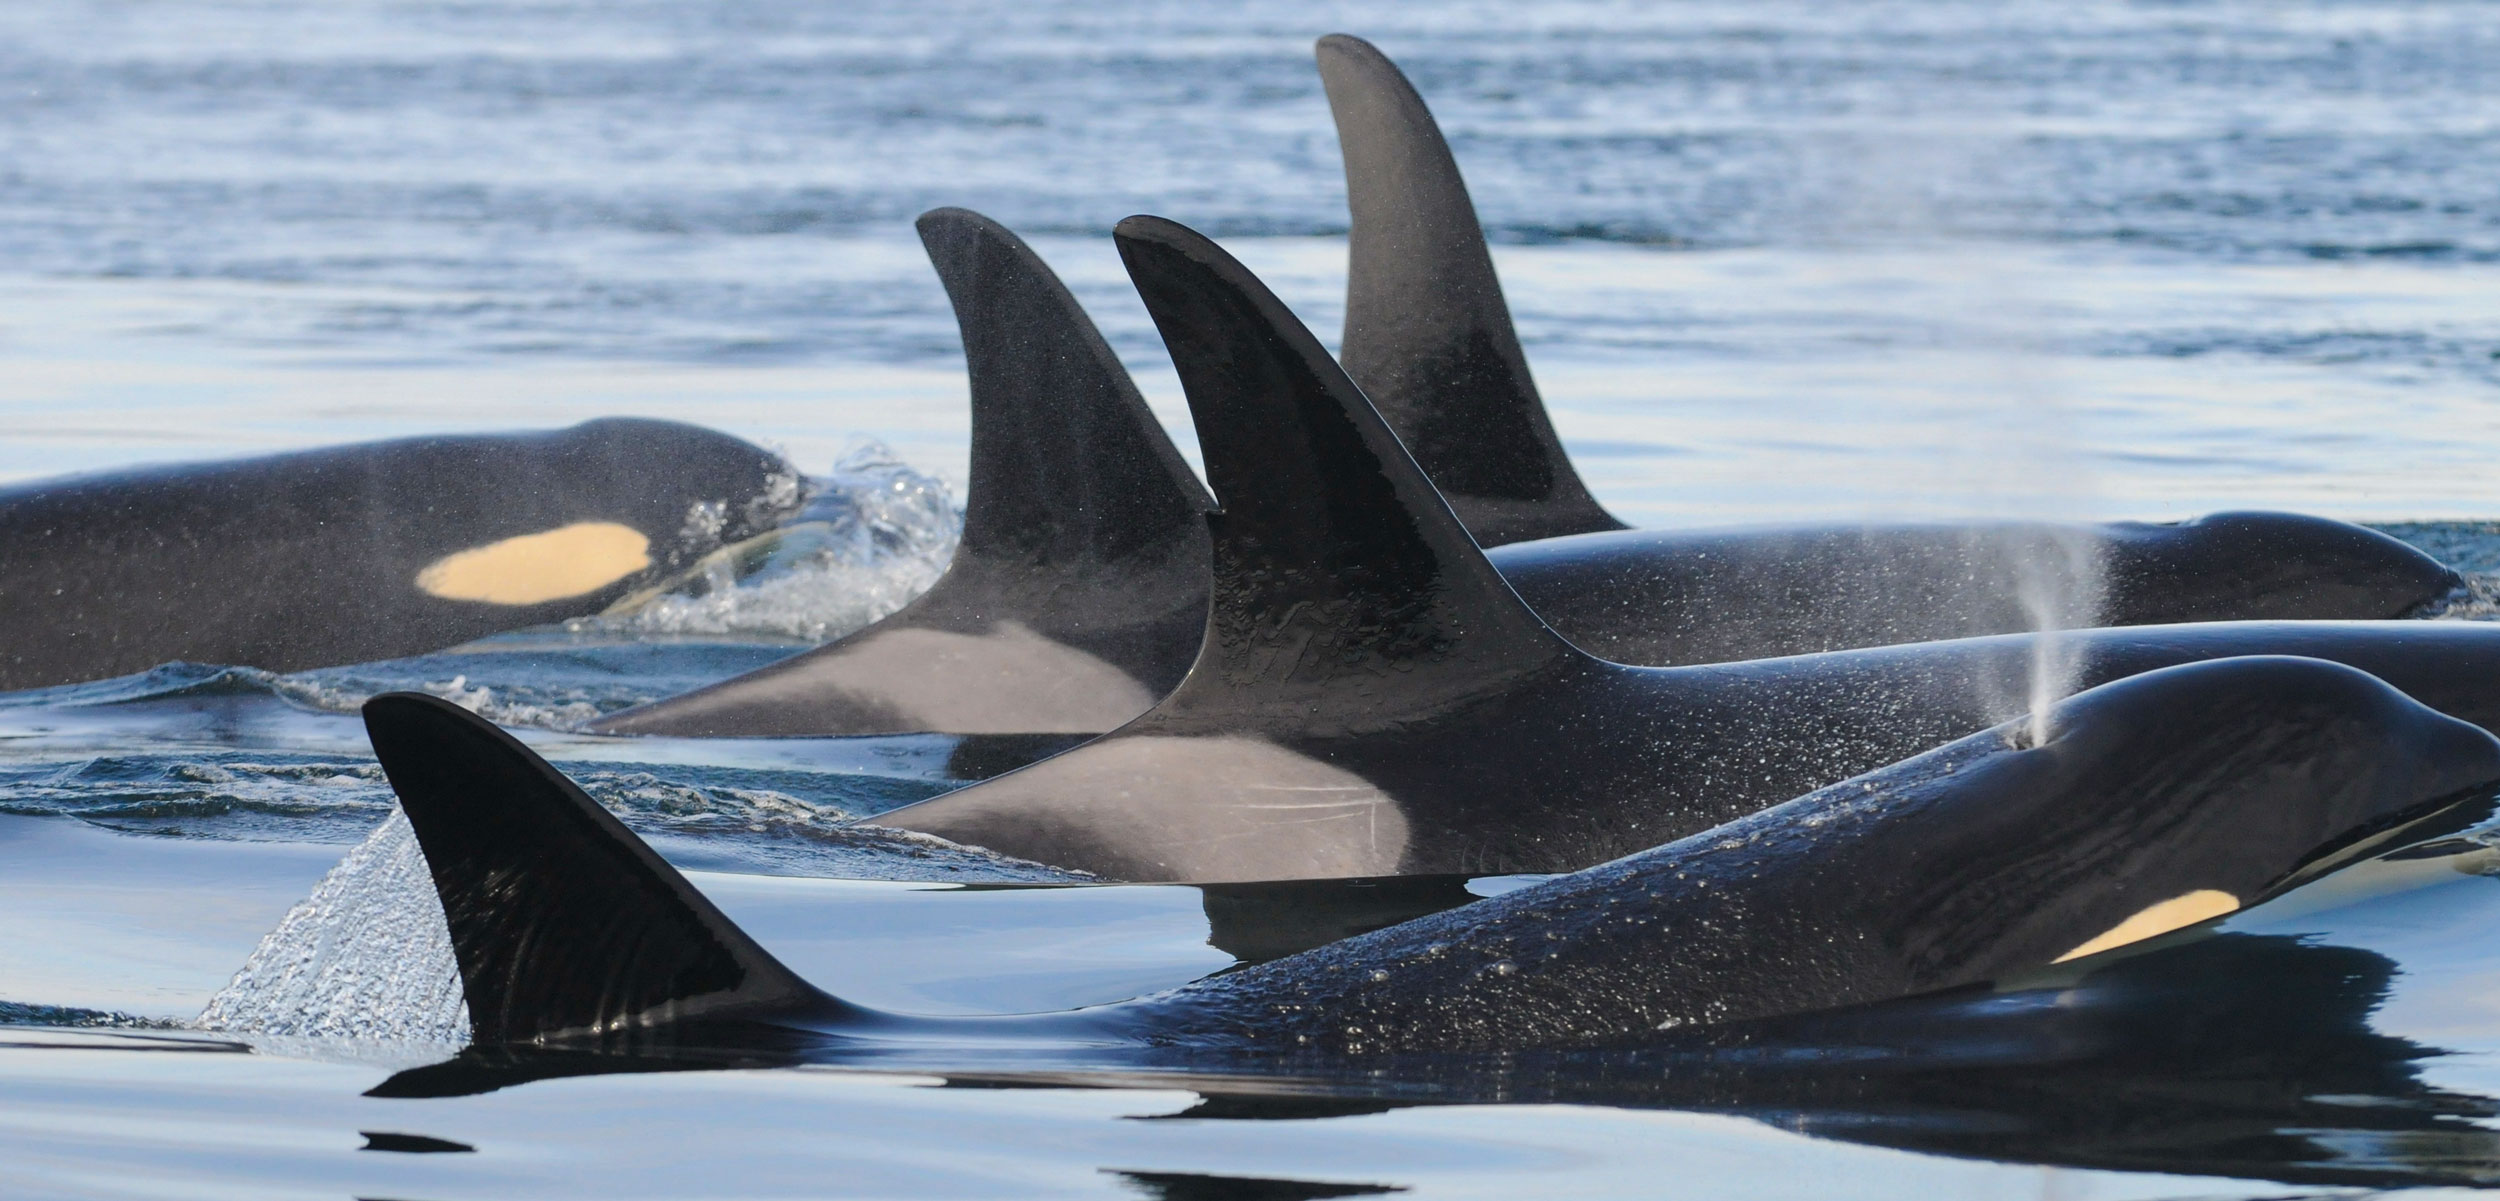 southern resident killer whales, one with tooth rake scars on its saddle patch